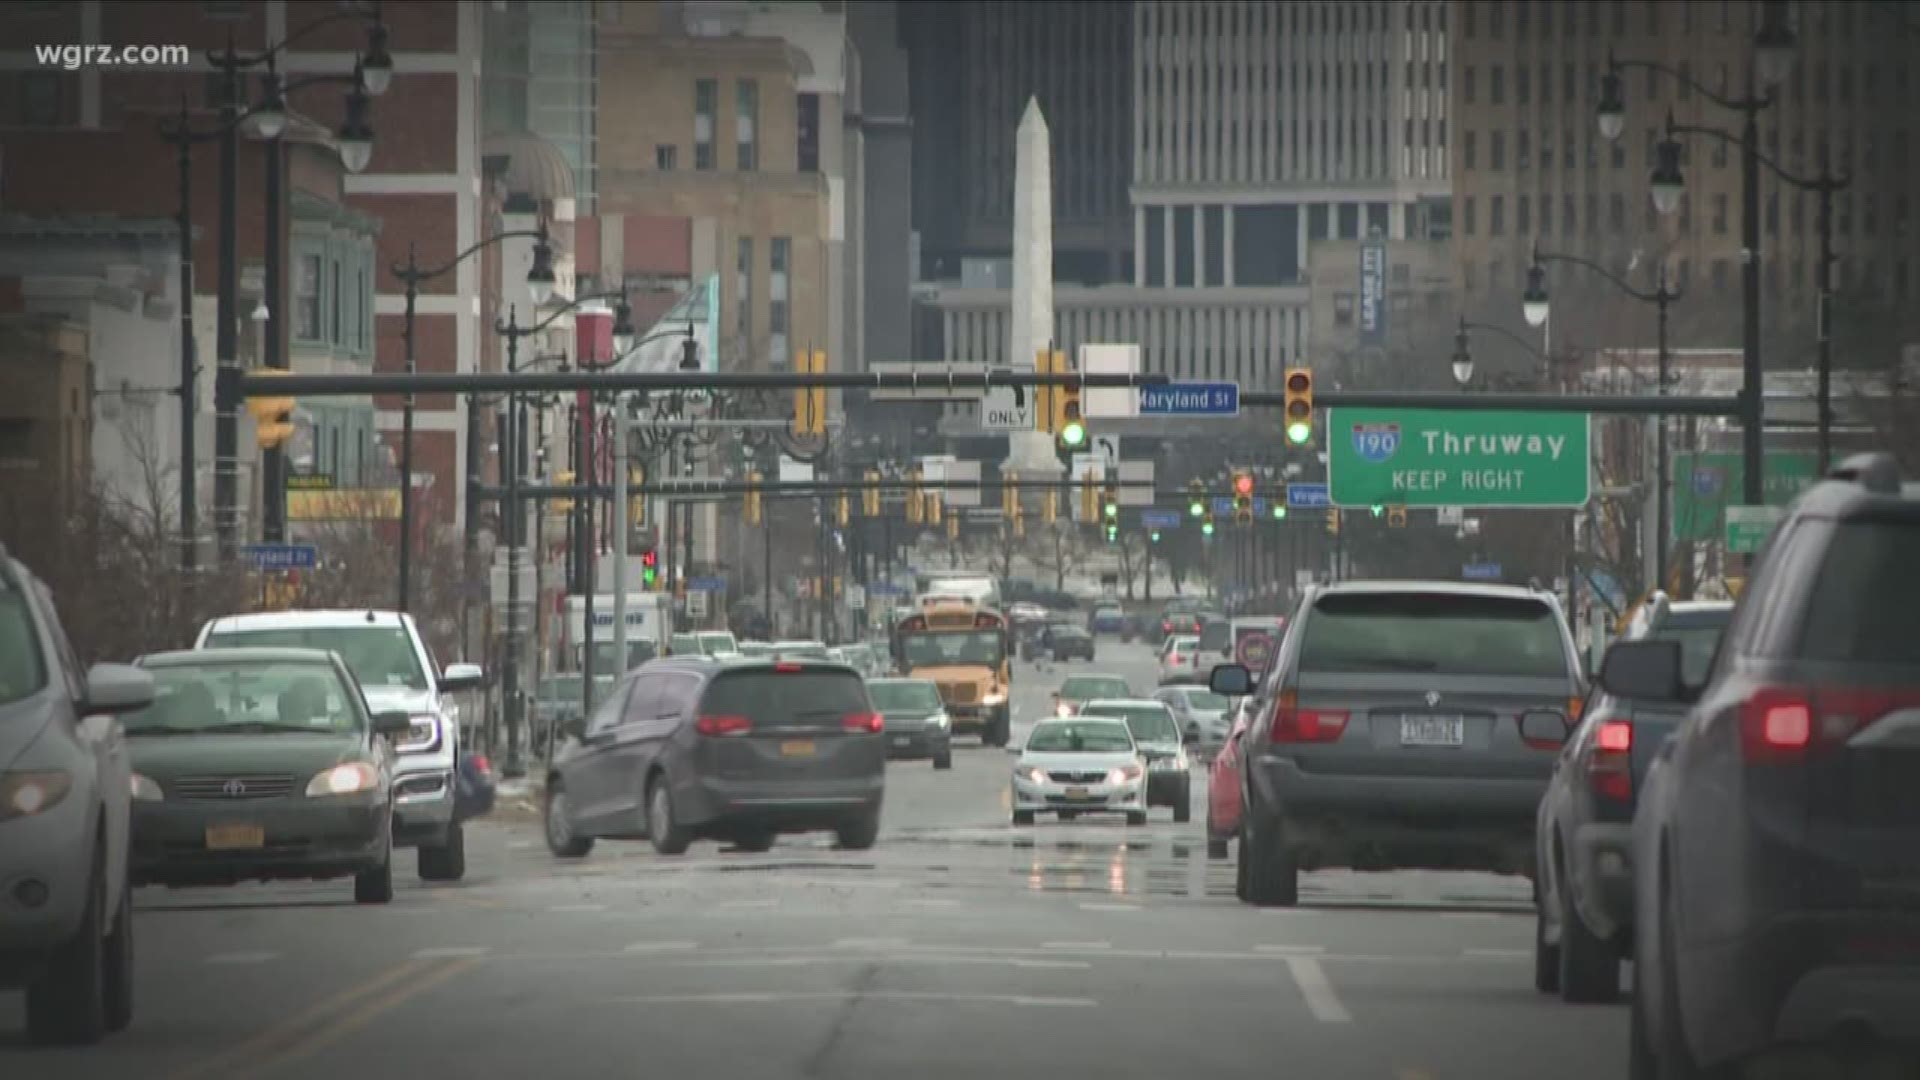 Representatives with Congress for New Urbanism looked into how Buffalo could adapt its existing streets and buildings to accommodate new transportation technology.